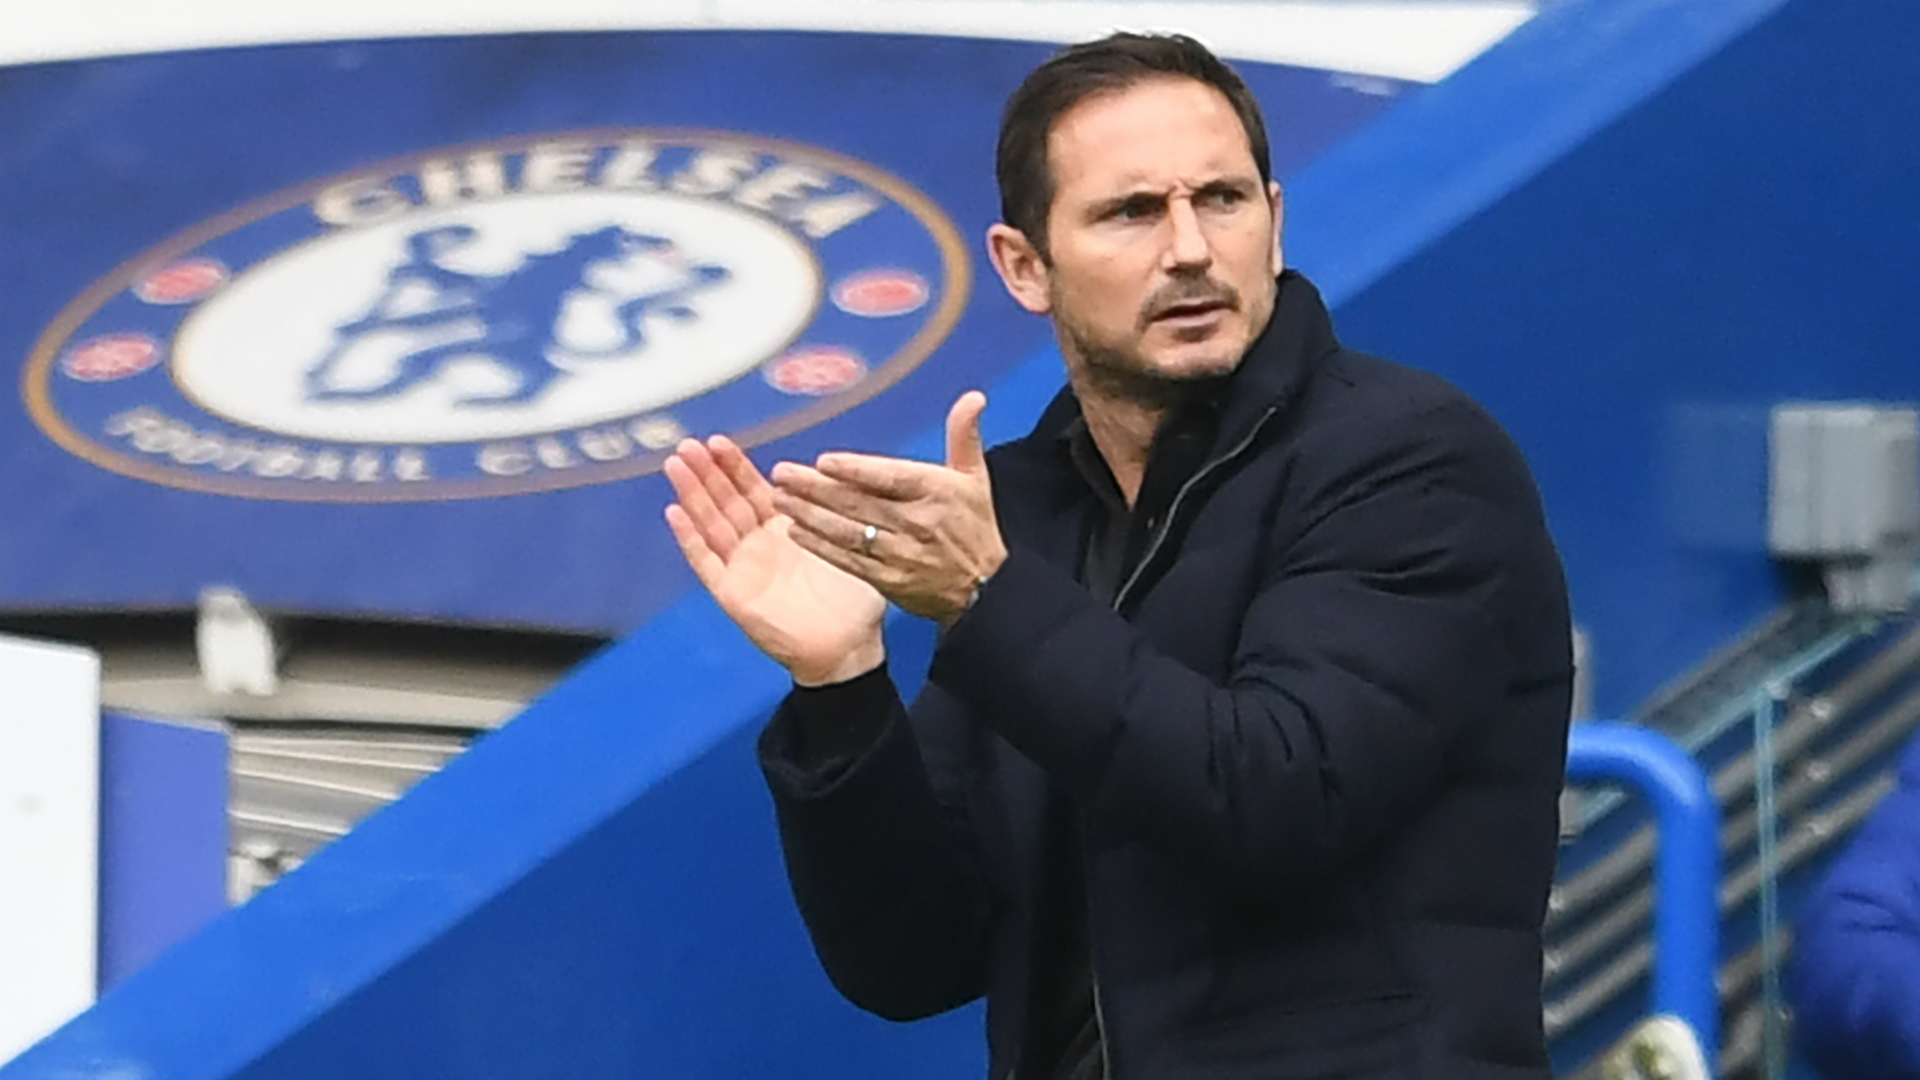 'Thank you for everything, legend!' - Thiago Silva says final goodbye to axed Chelsea boss Lampard